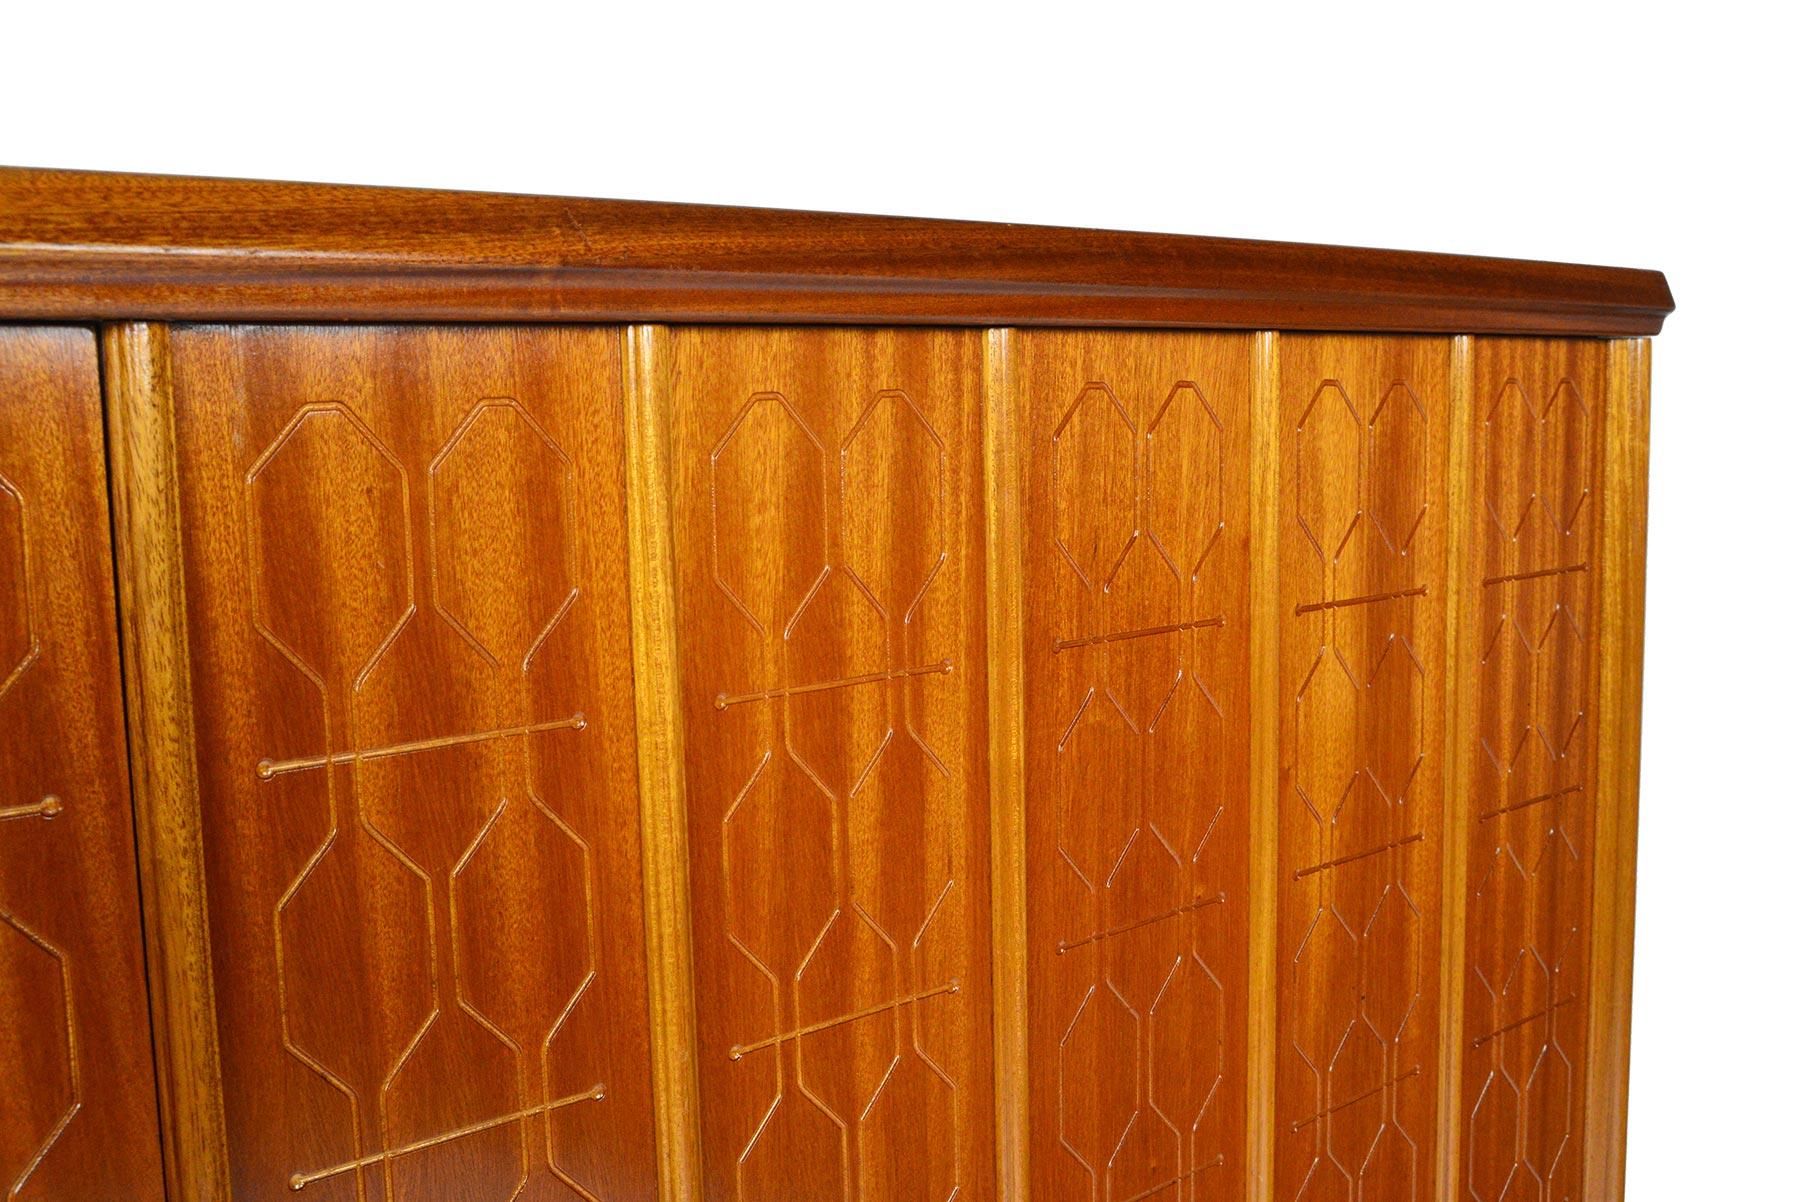 Tall Rastad and Relling Tall Geometric Credenza in Mahogany 2